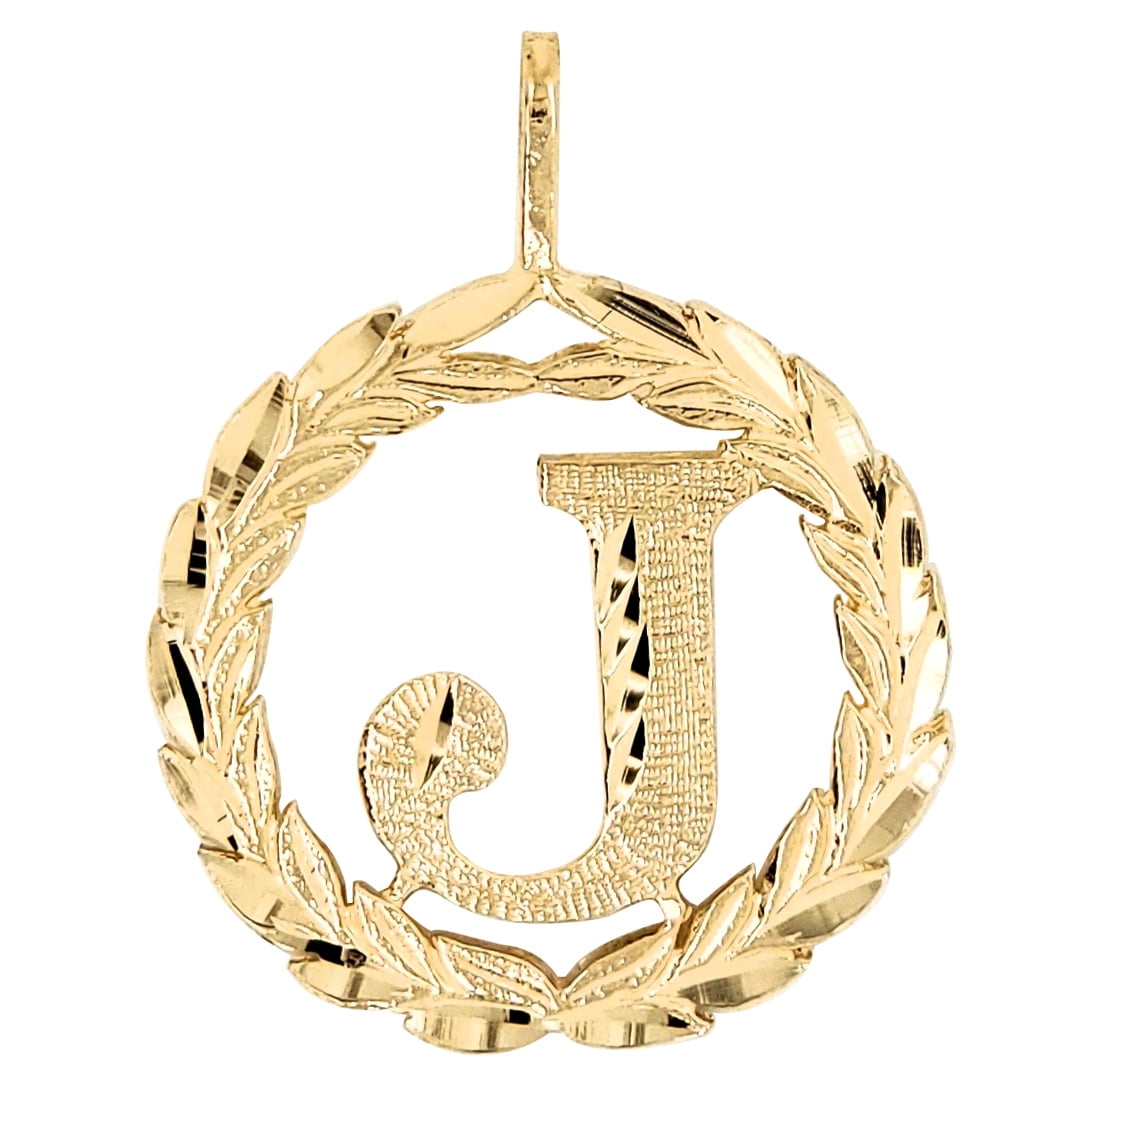 Details about   14k Yellow Gold Round Wreath Initial Letter 'E' Pendant